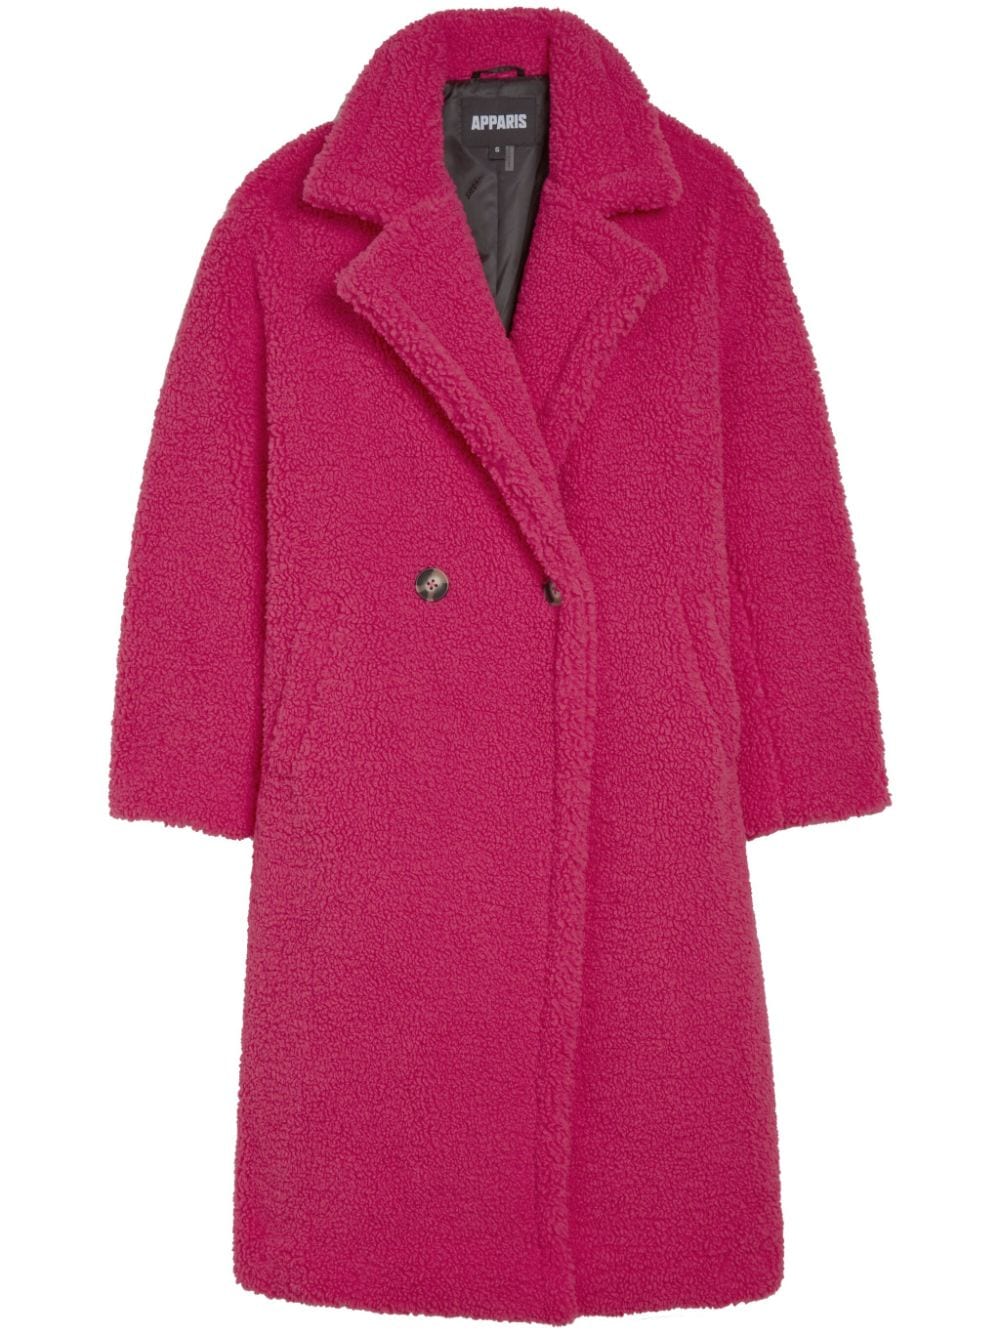 Apparis Anoushka double-breasted sherpa coat - Pink von Apparis